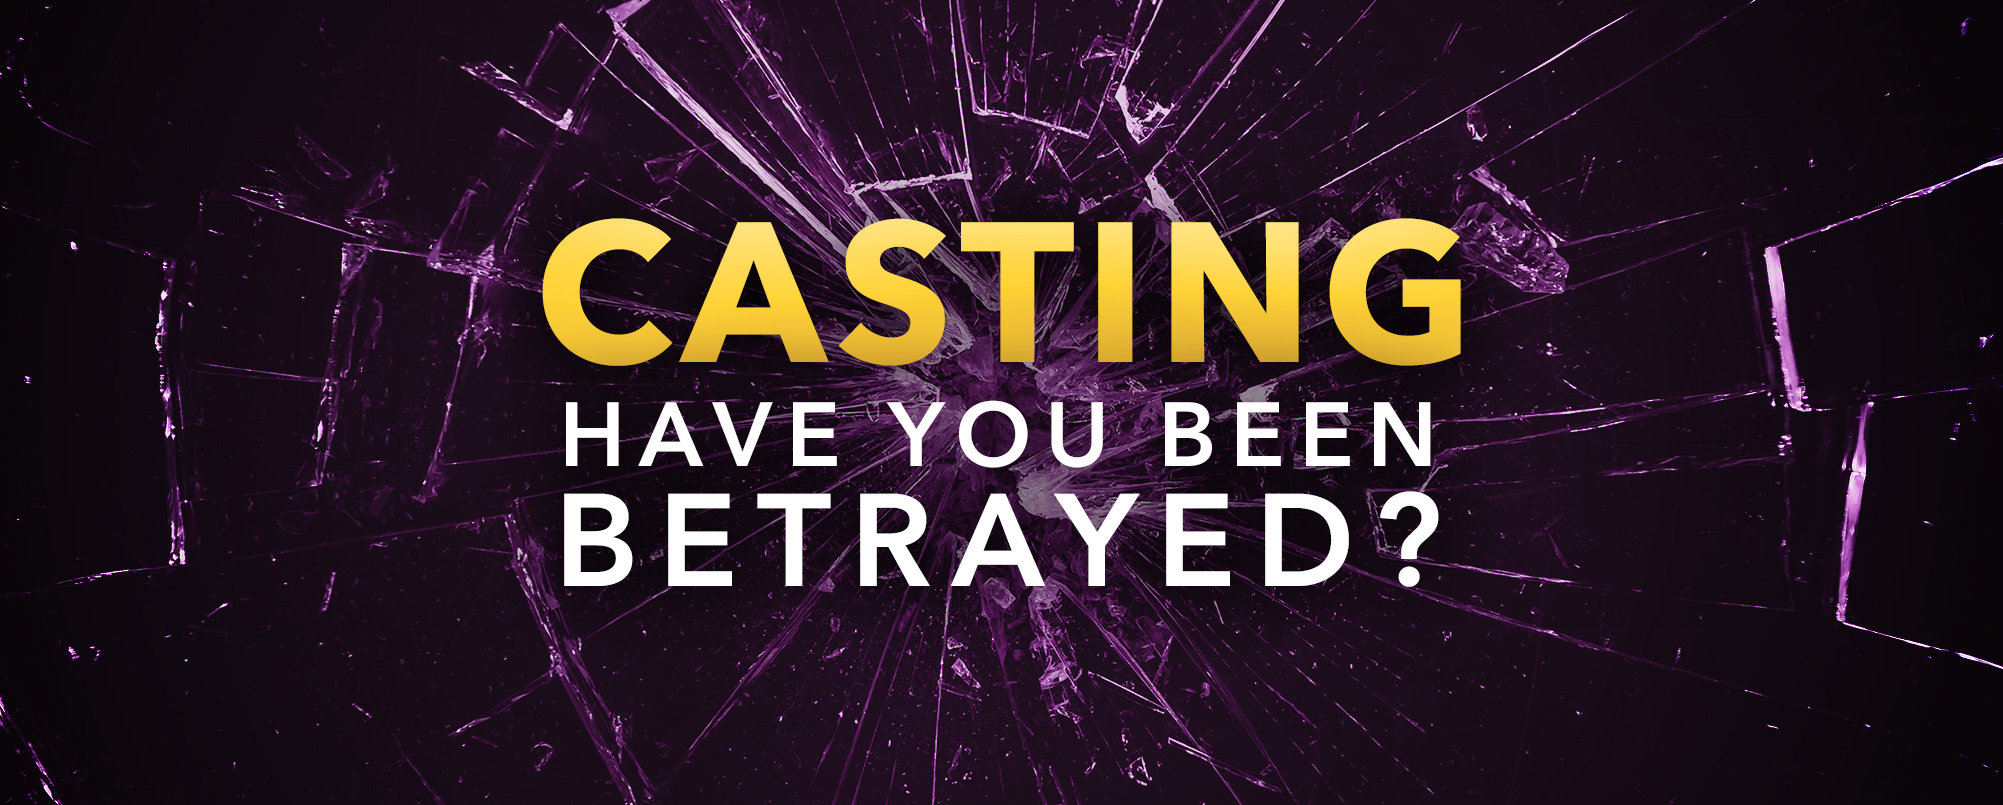 Casting: Have You Been Betrayed?